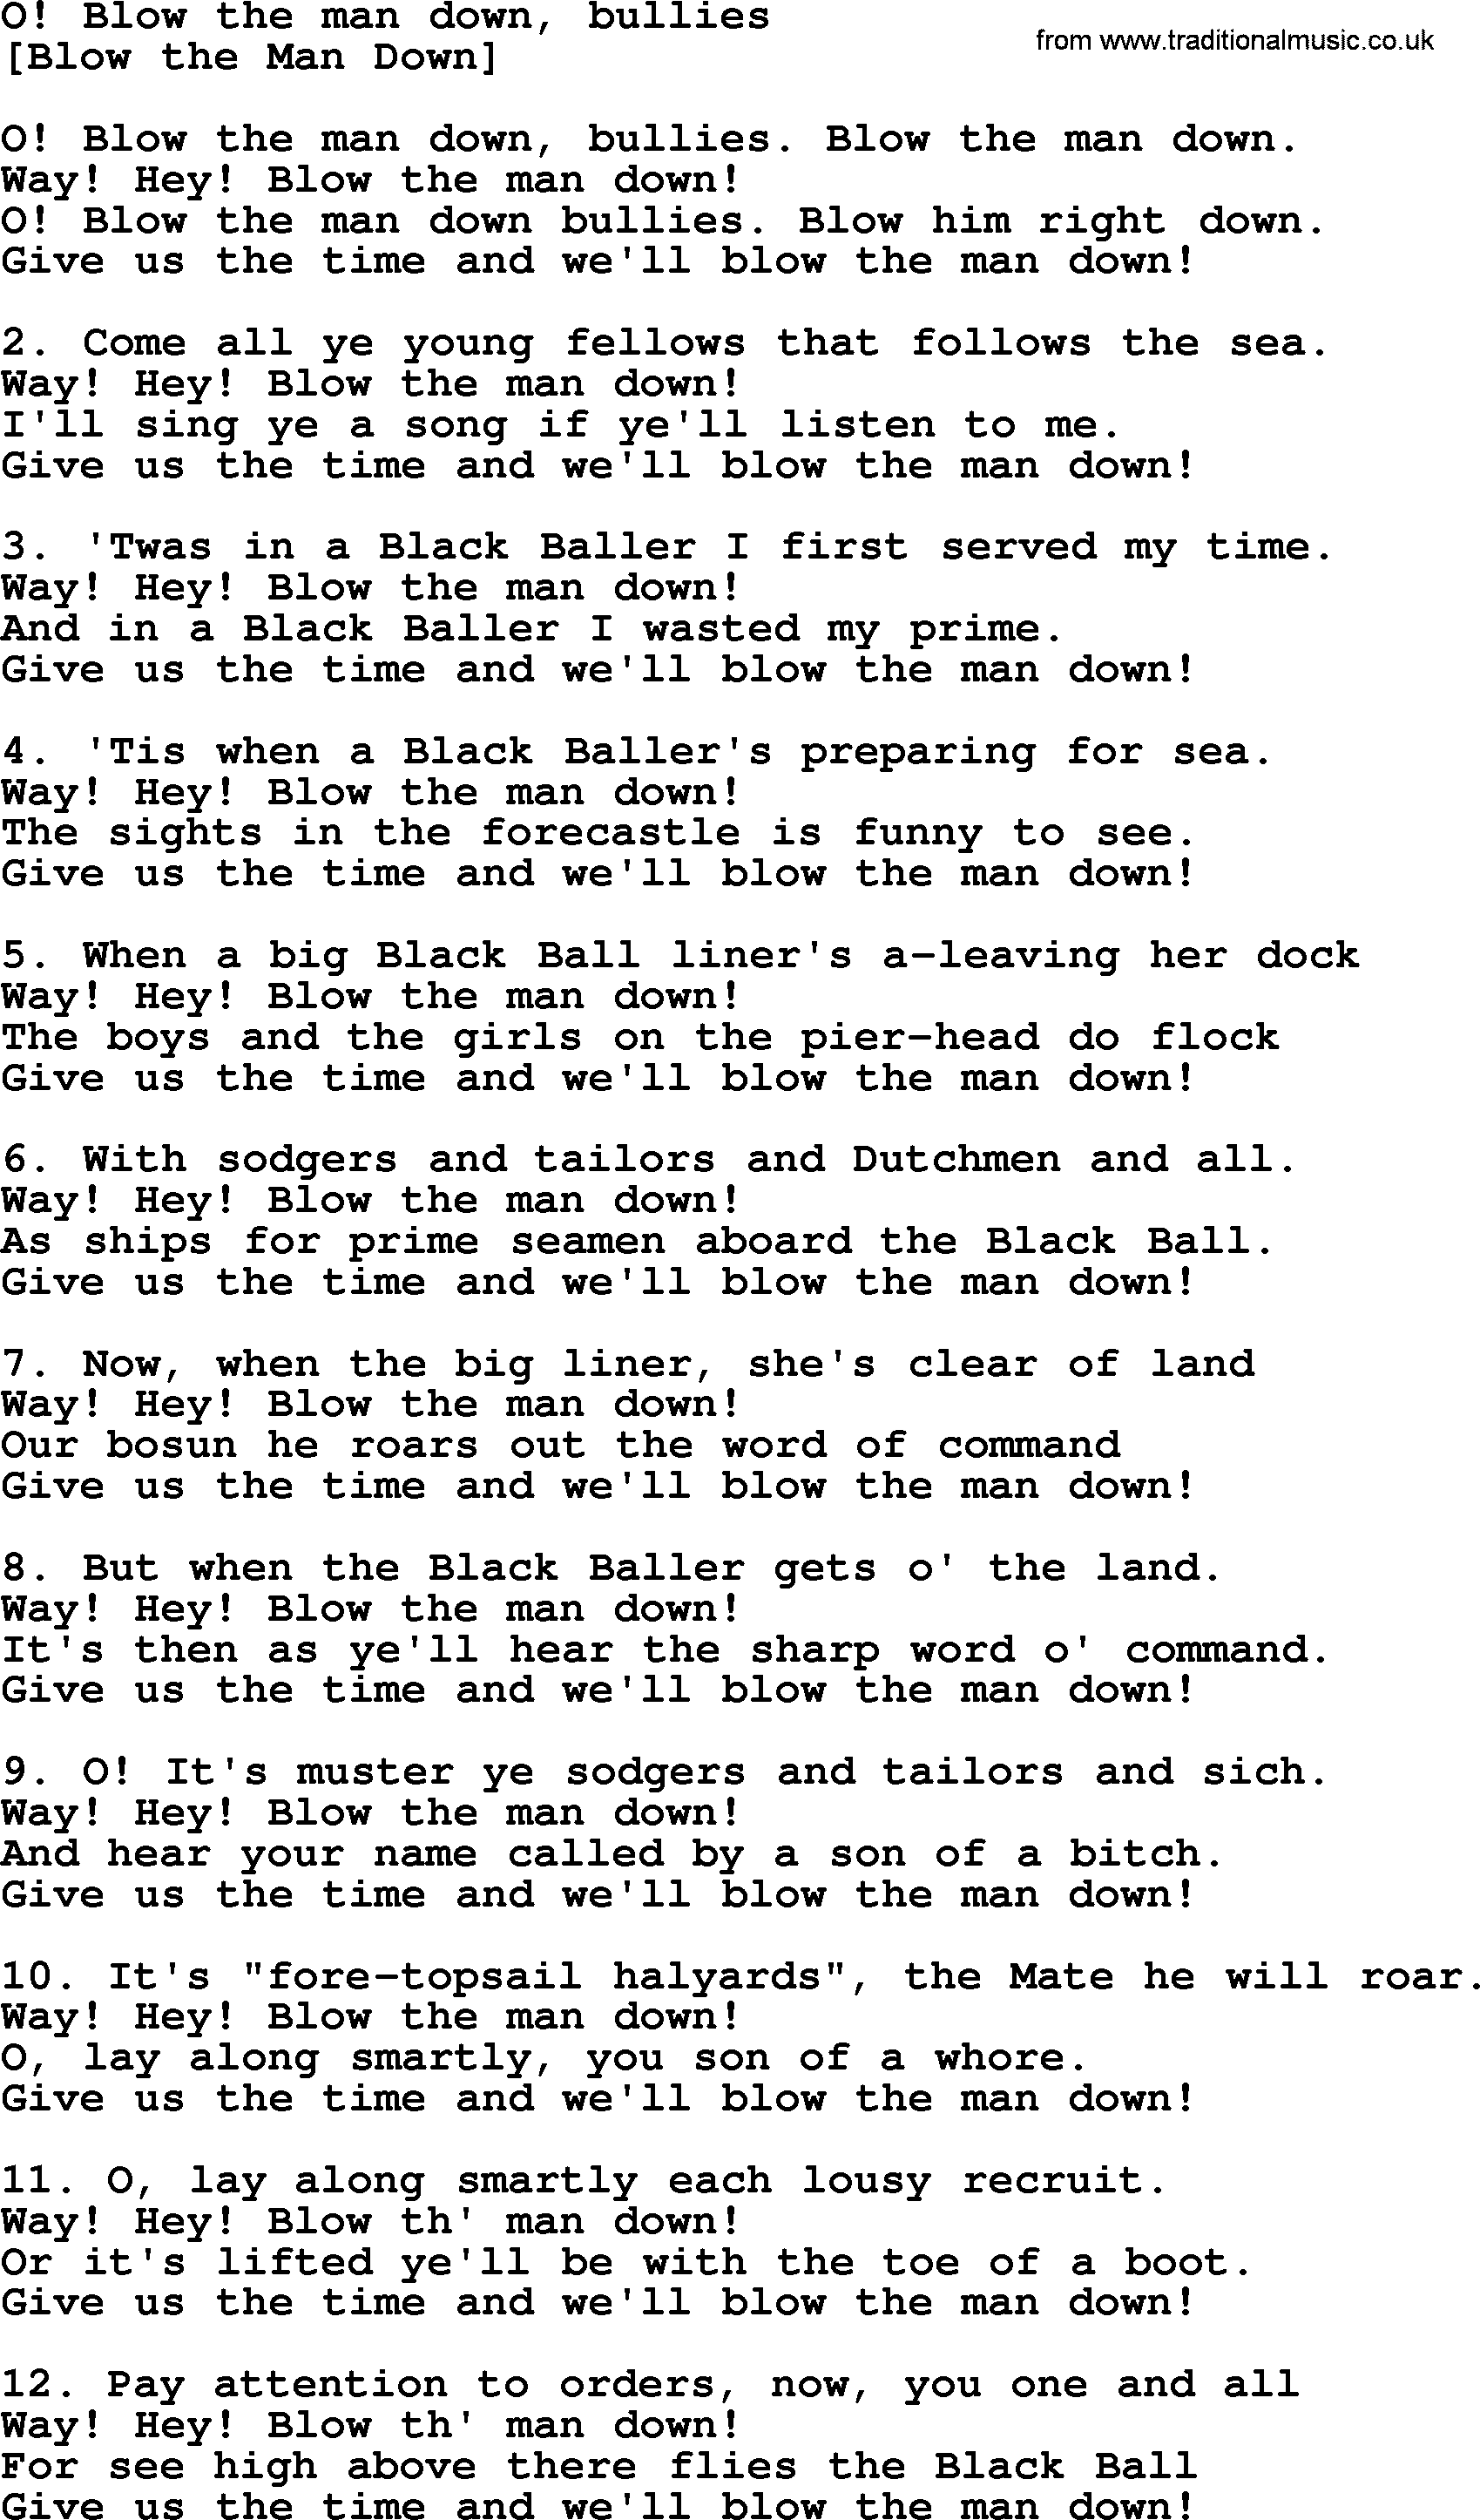 Old English Song Lyrics for O! Blow The Man Down, Bullies, with PDF